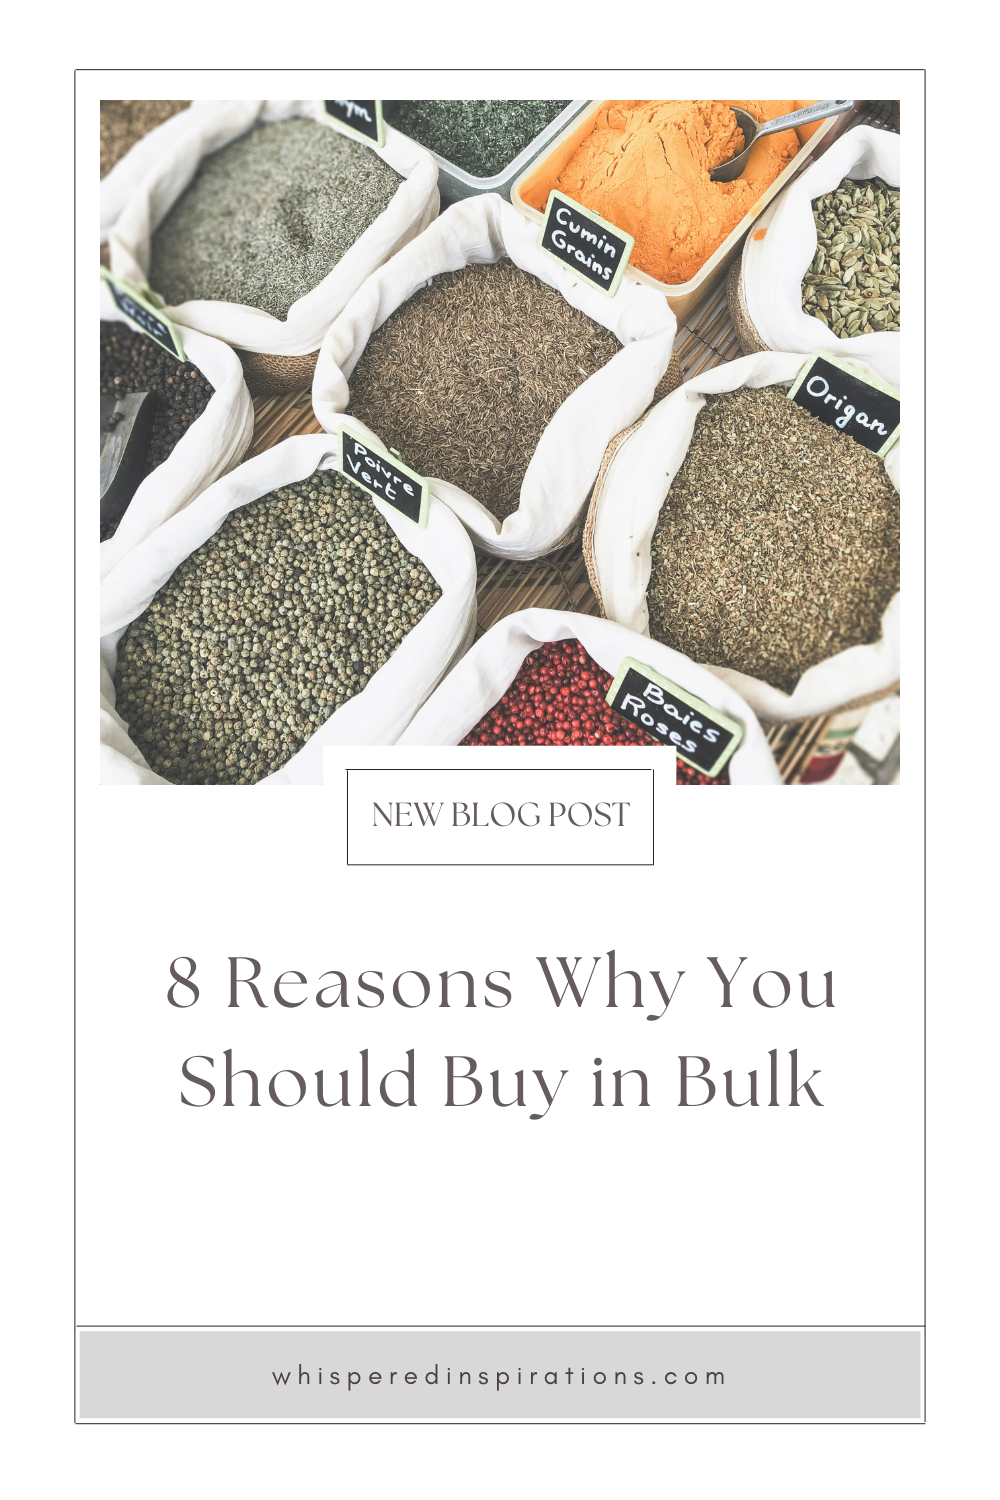 Spices with scoops that are being sold in bulk. This article covers 8 reasons why you should buy in bulk.